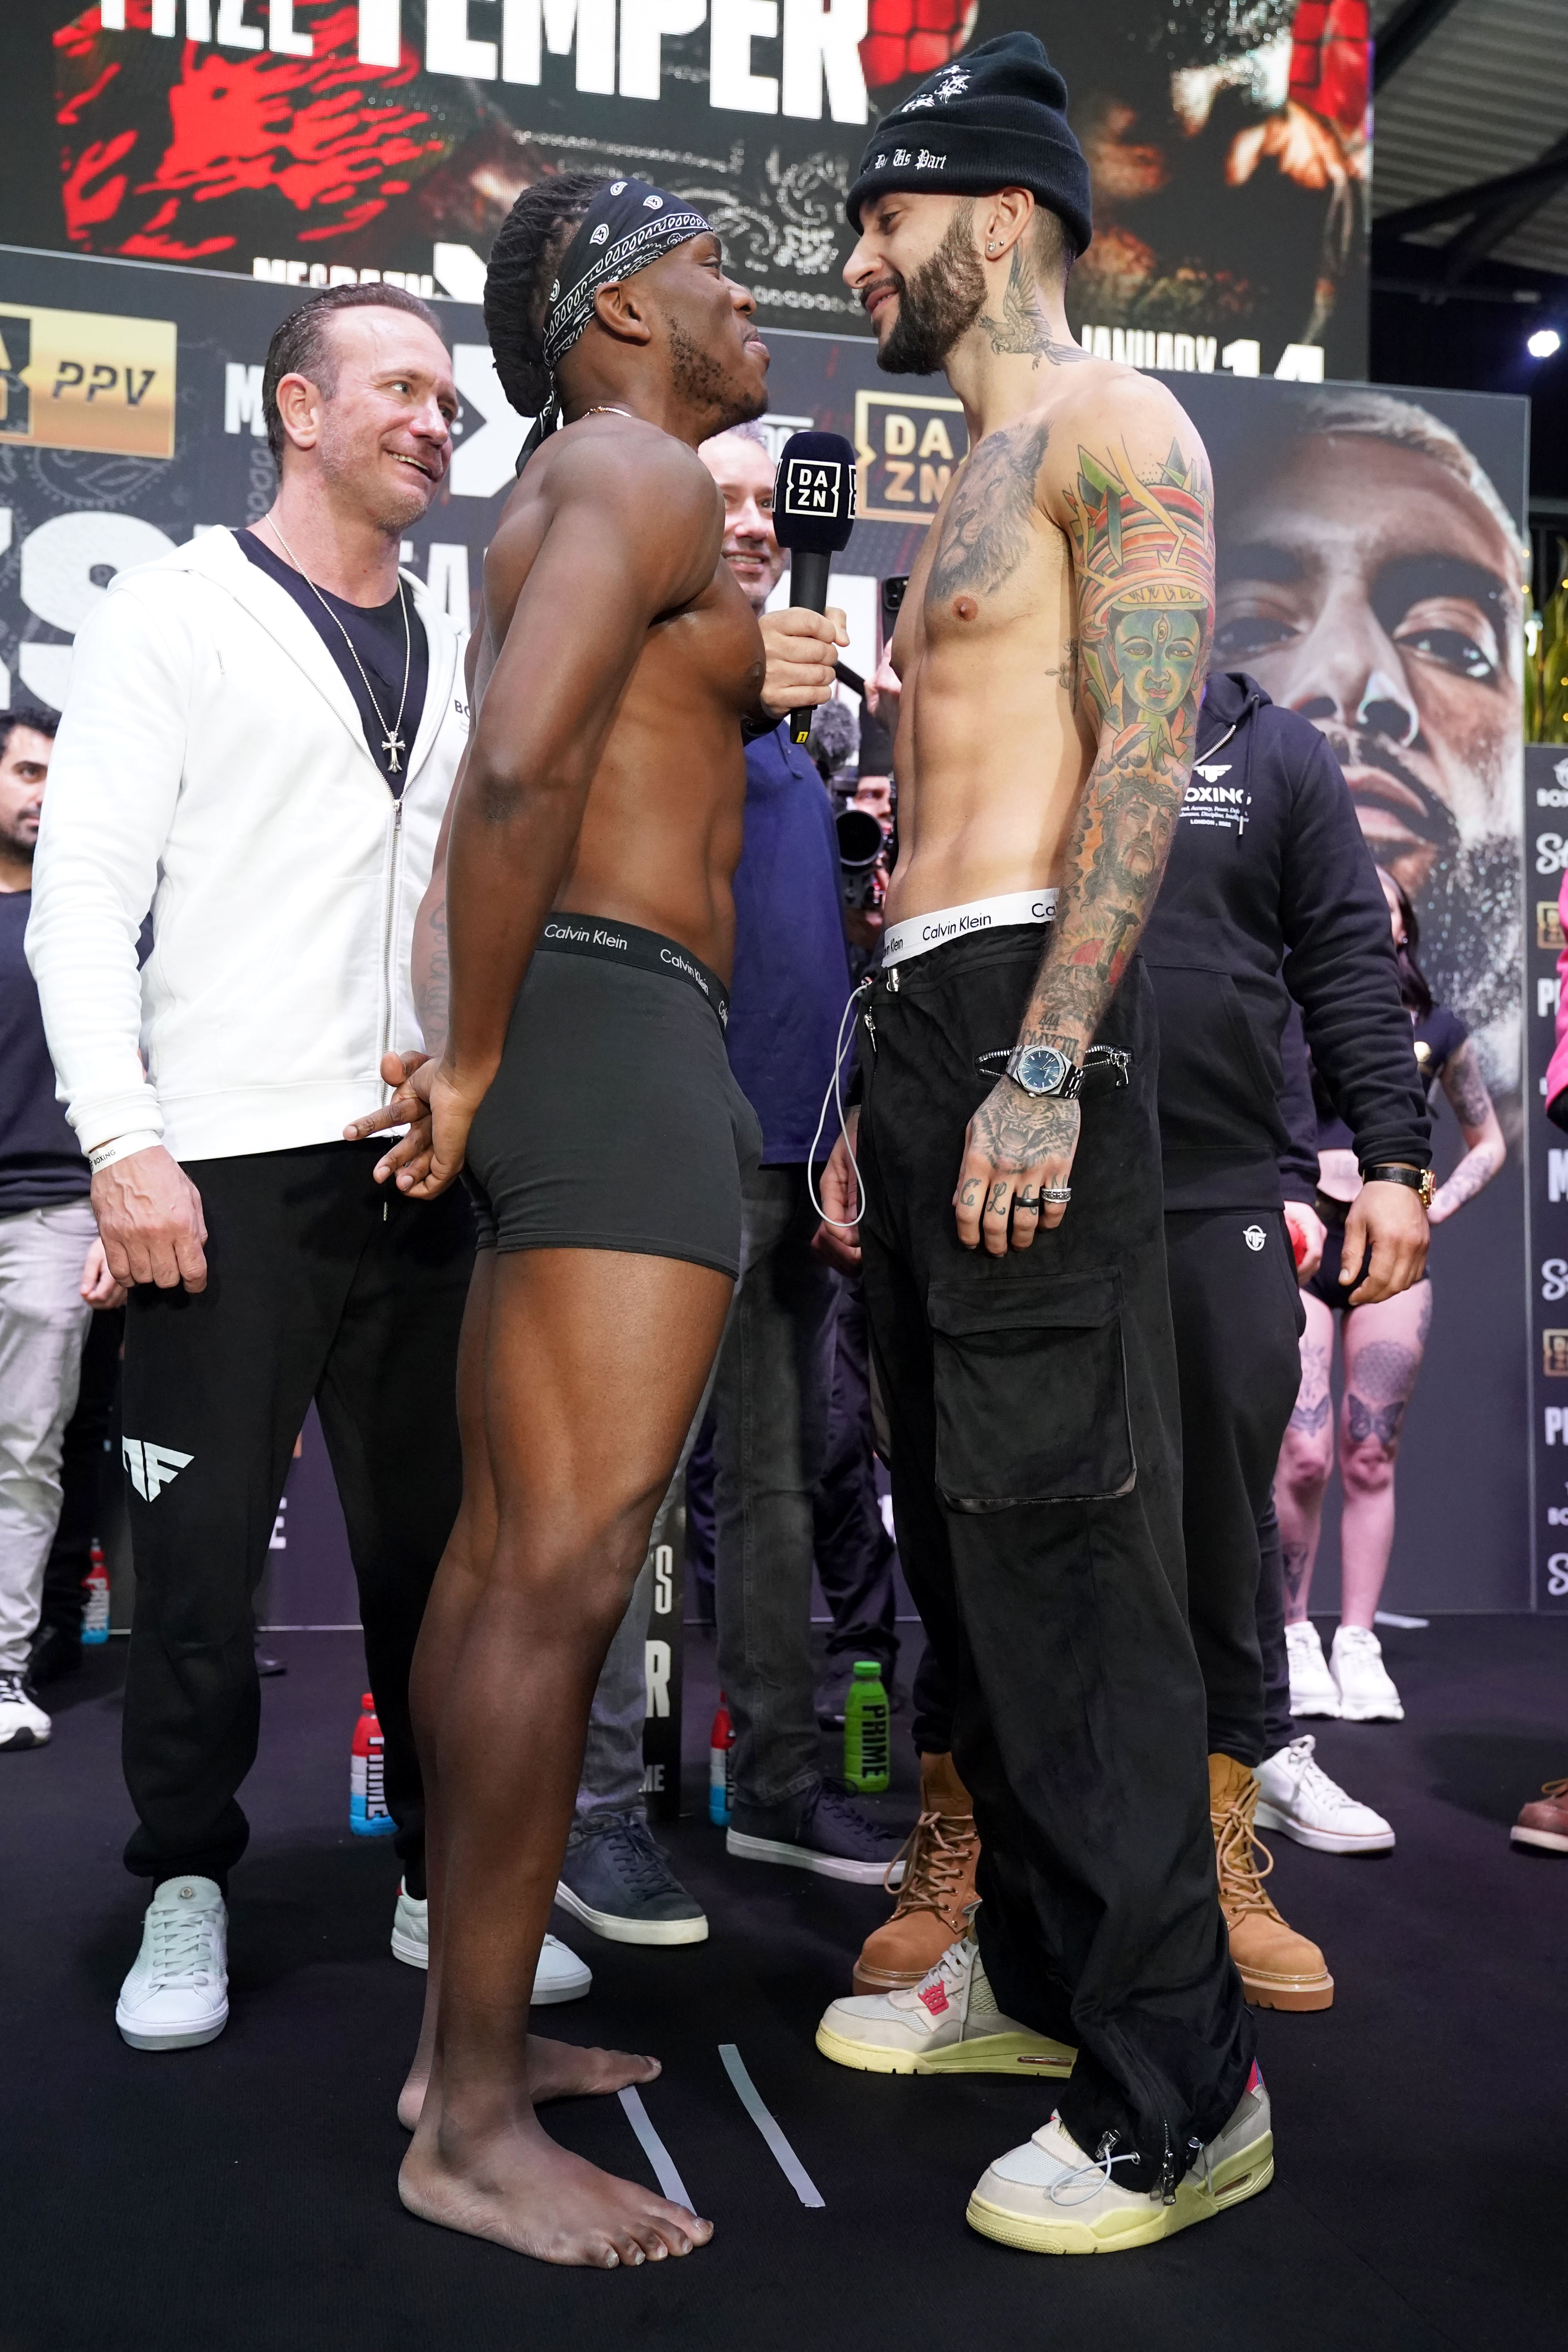 KSI (left) and FaZe Temperrr during the weigh-in at BOXPARK Wembley, London.